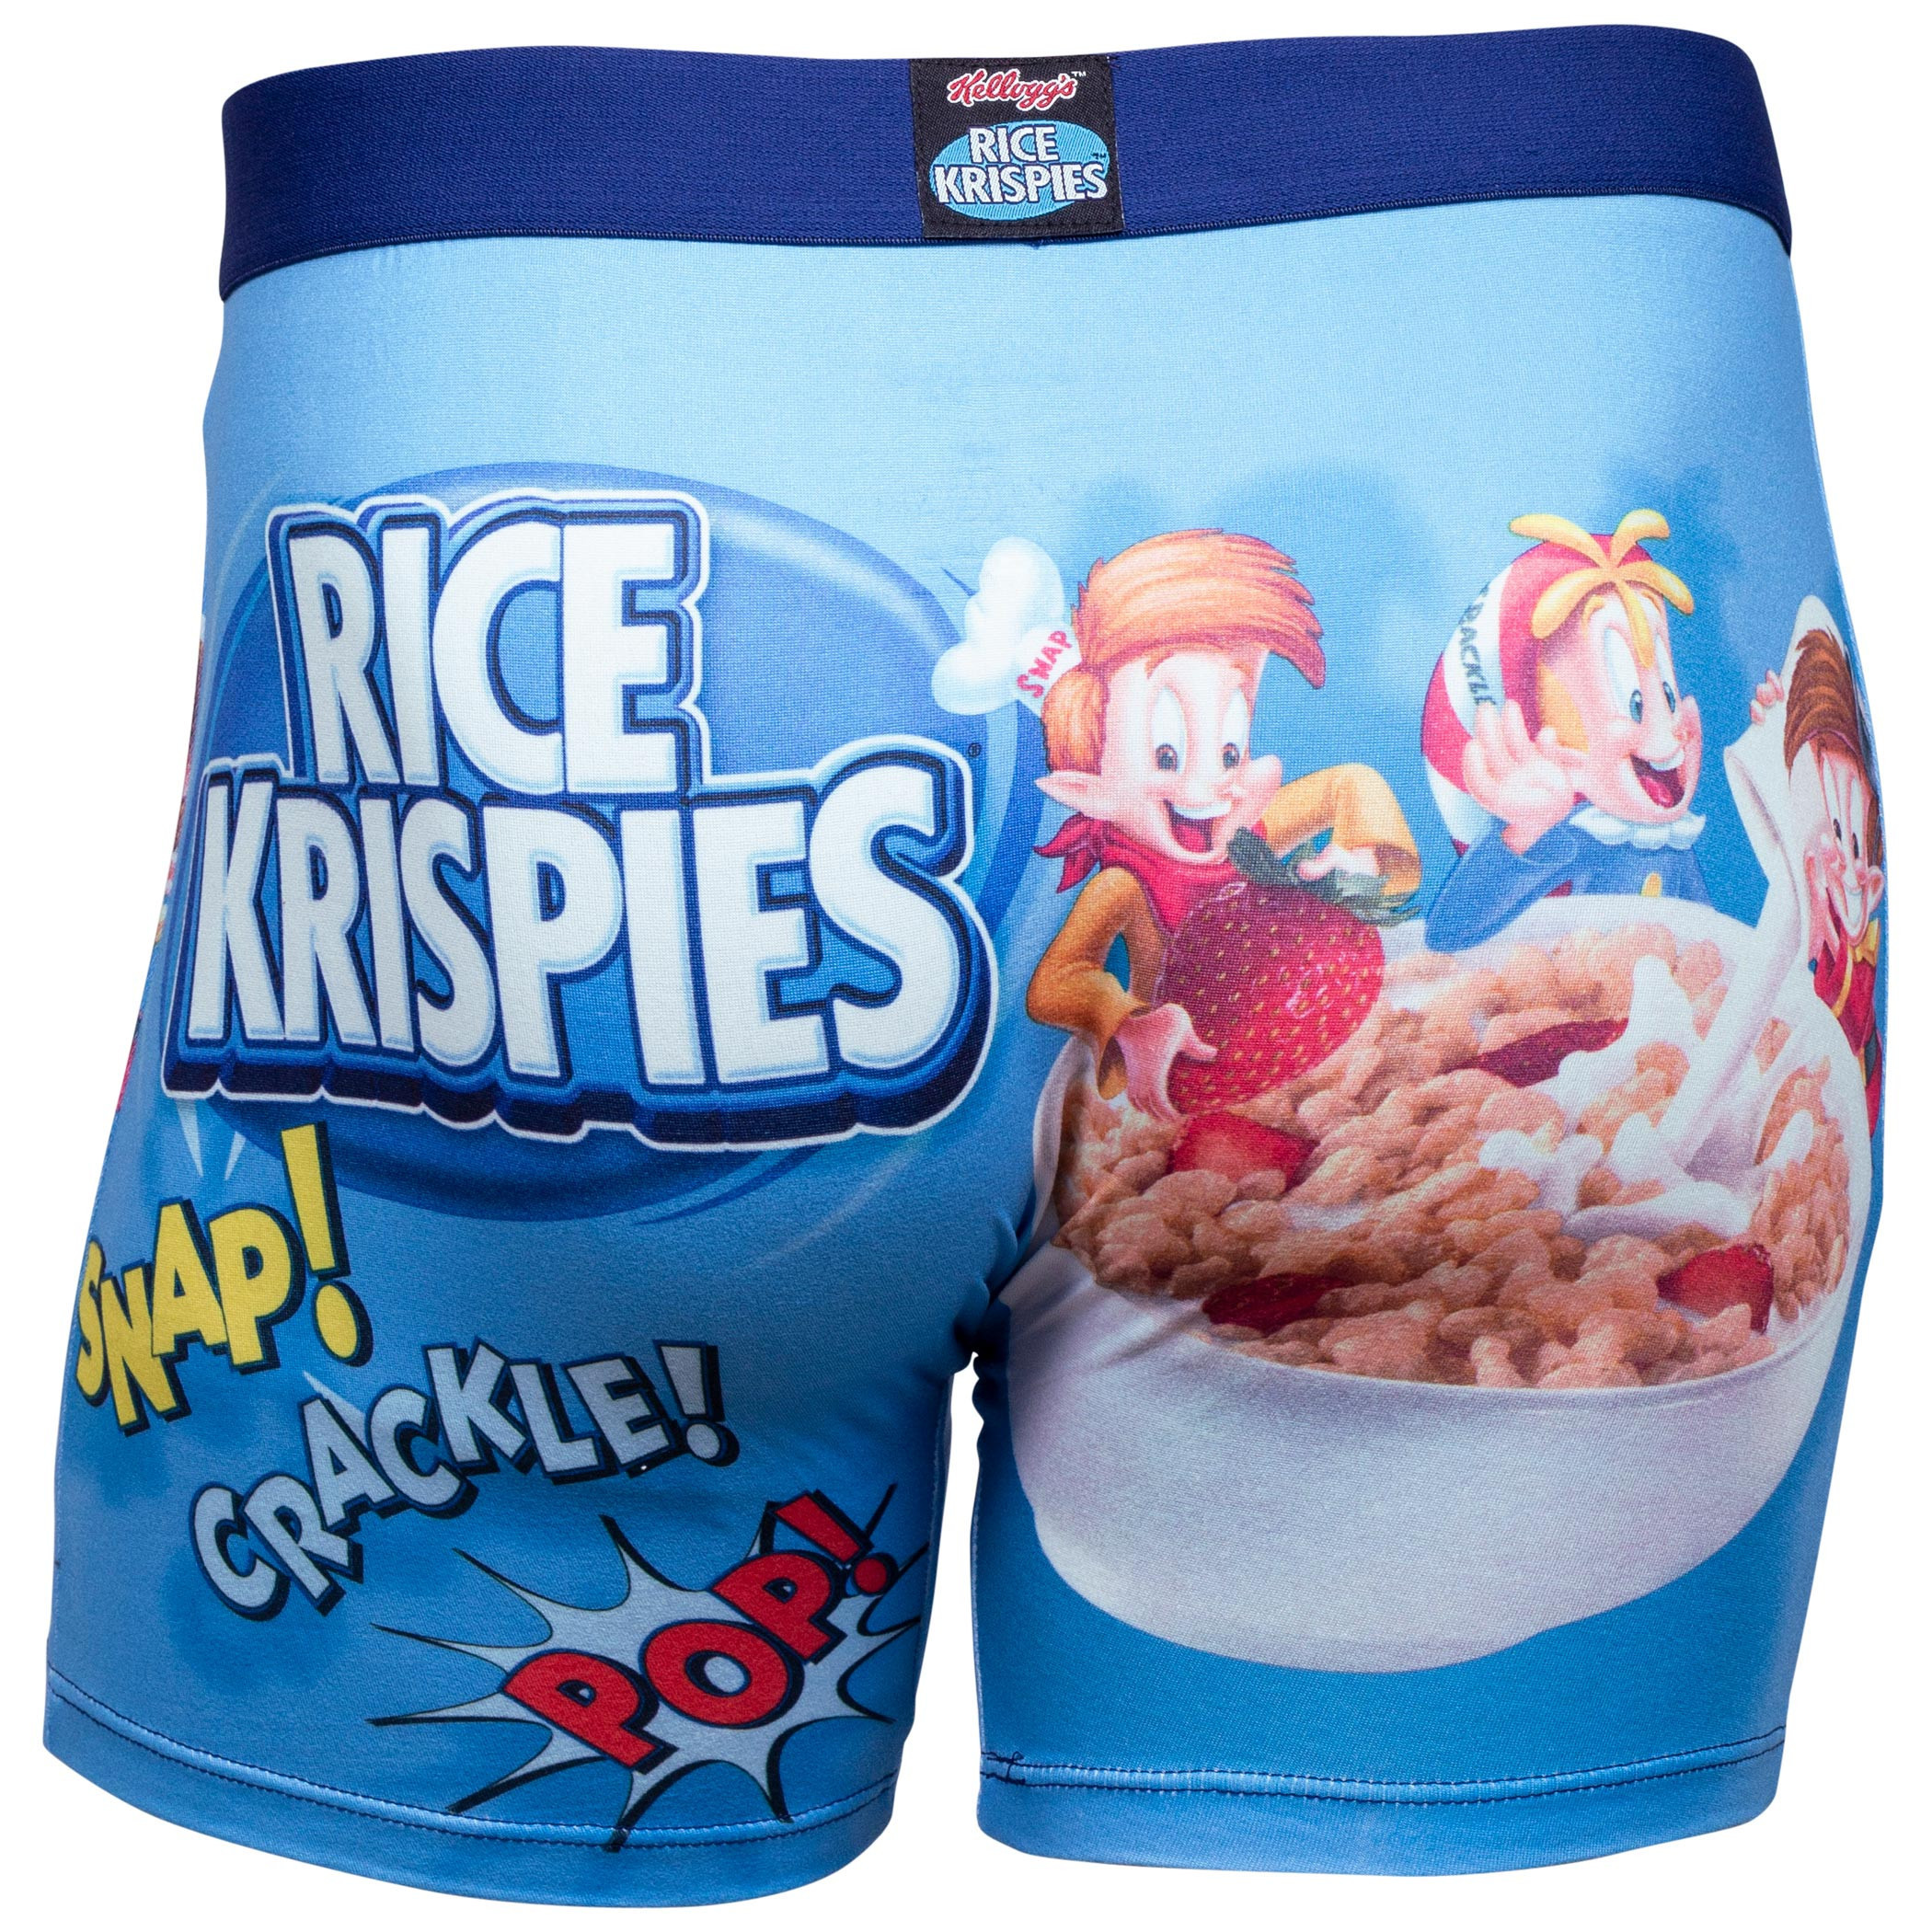 Rice Krispies Boxer Briefs in Cereal Box